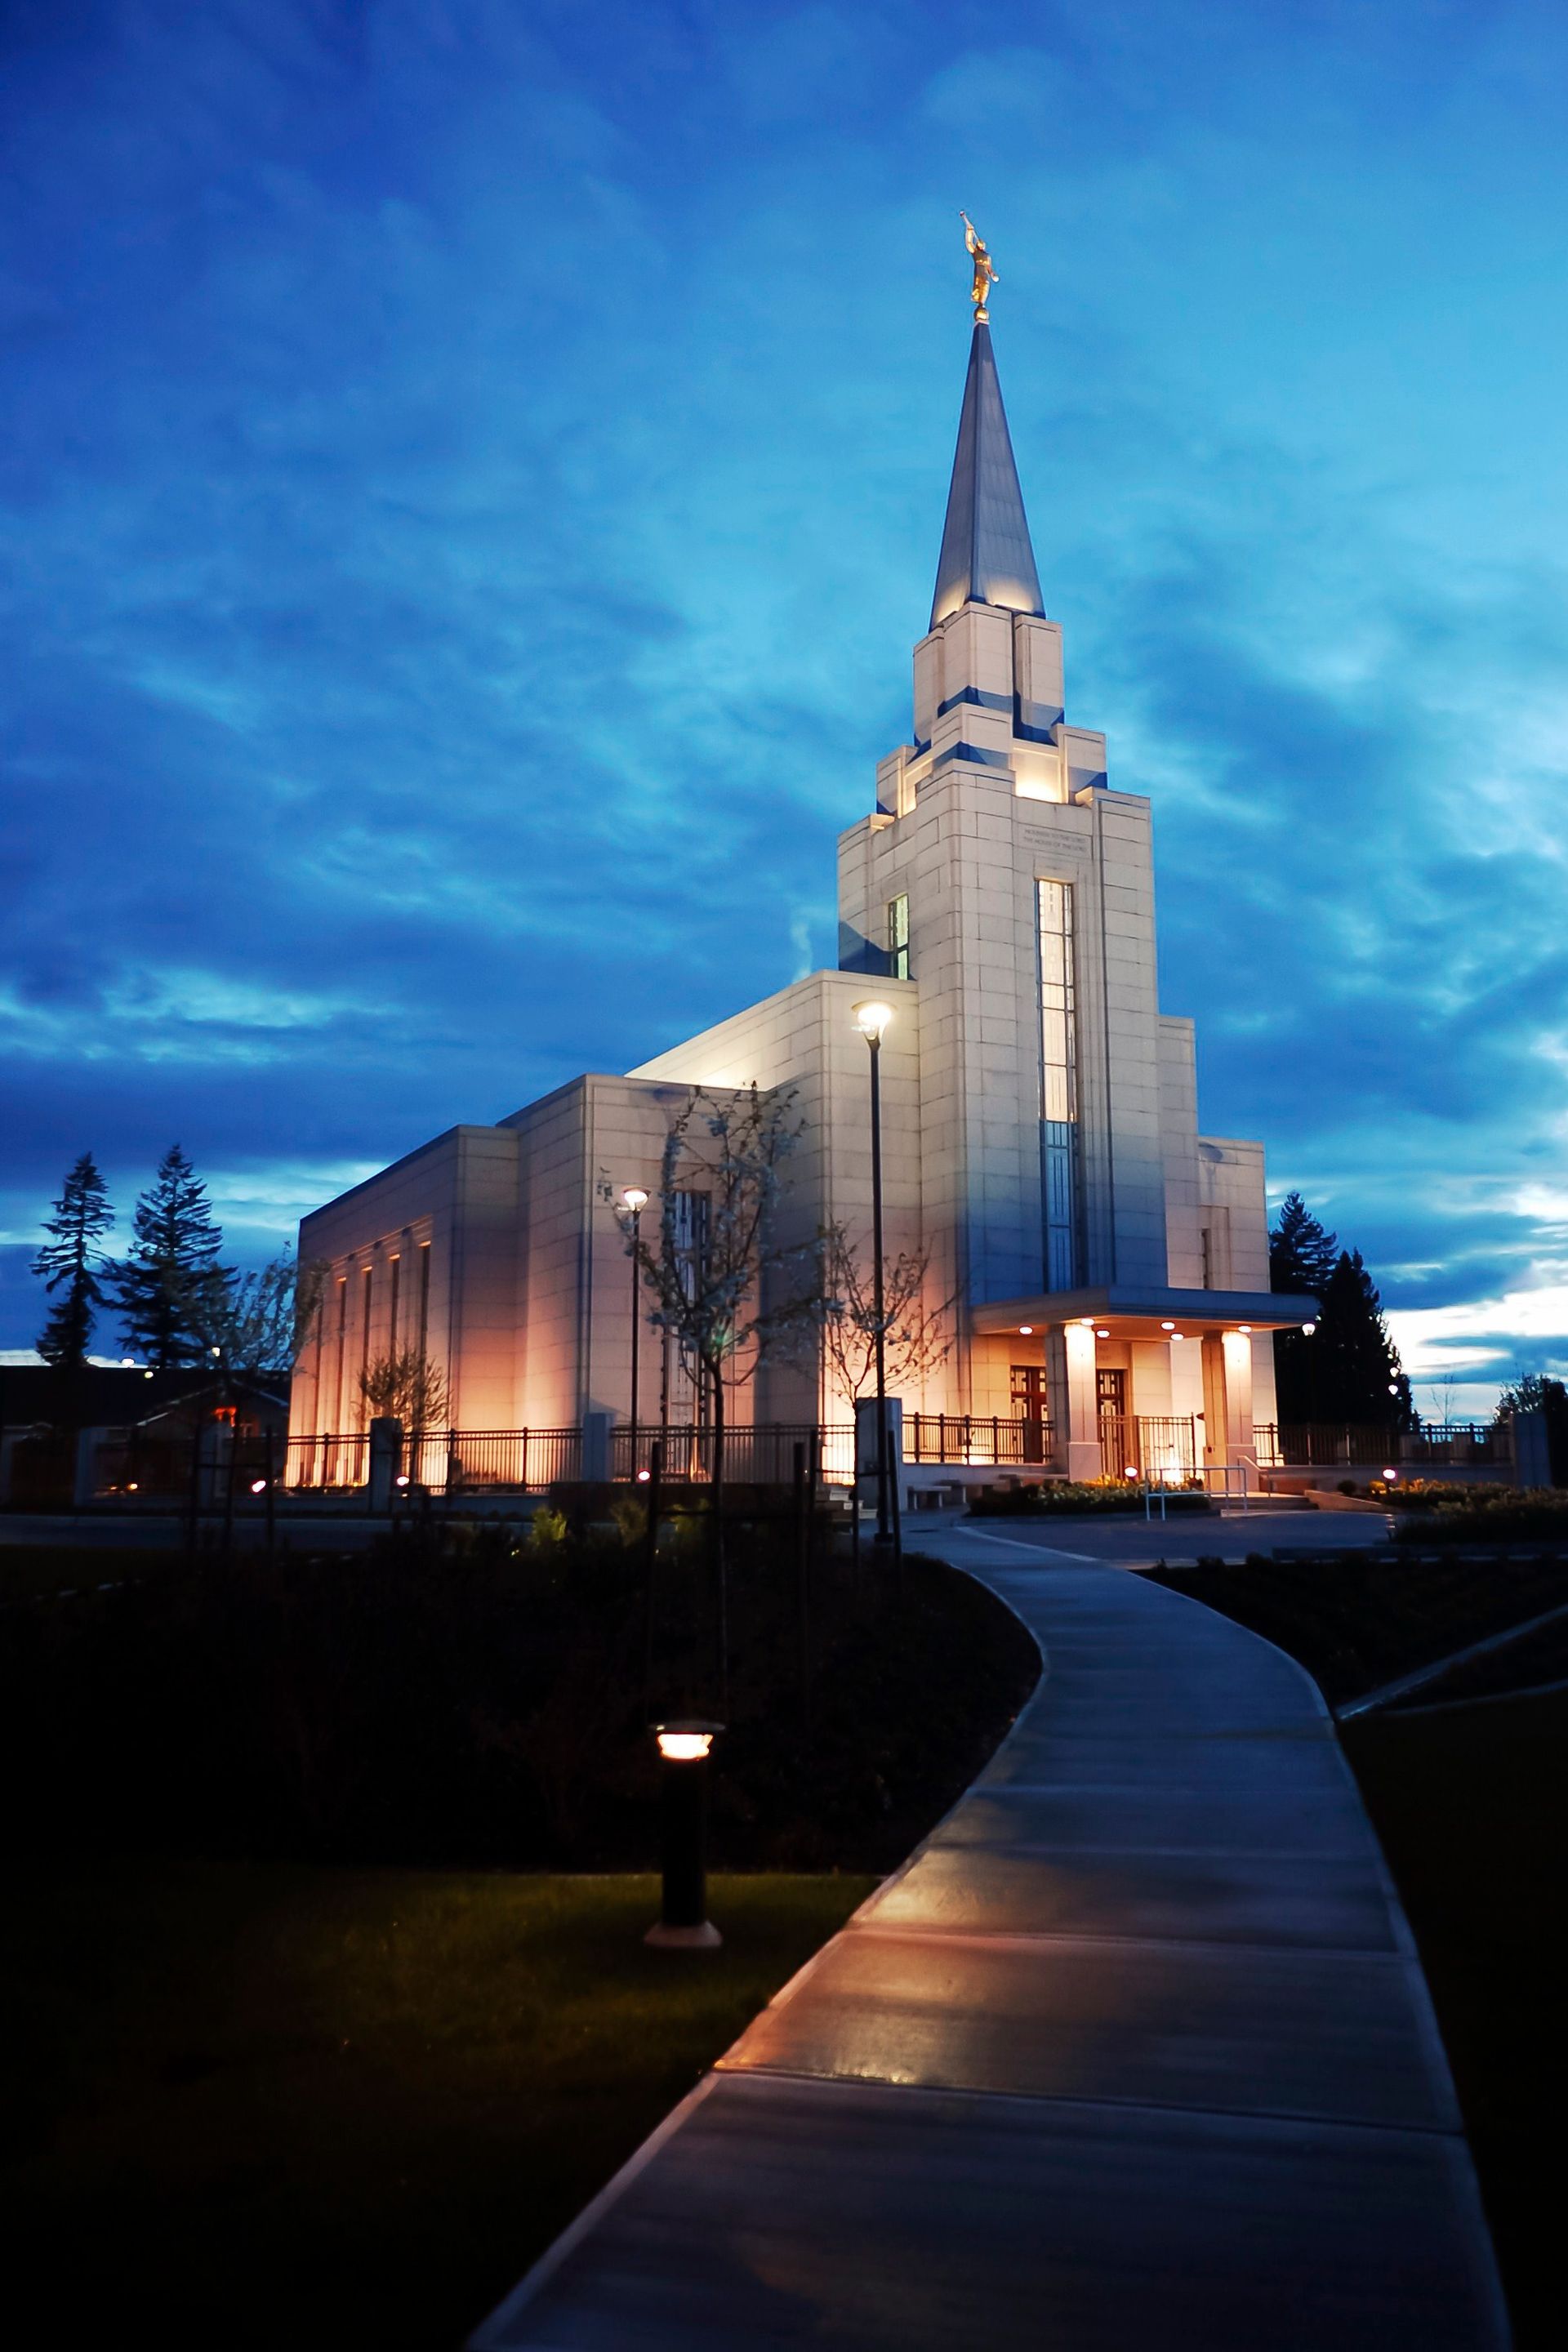 The Vancouver British Columbia Temple in the evening, with the entrance and grounds.